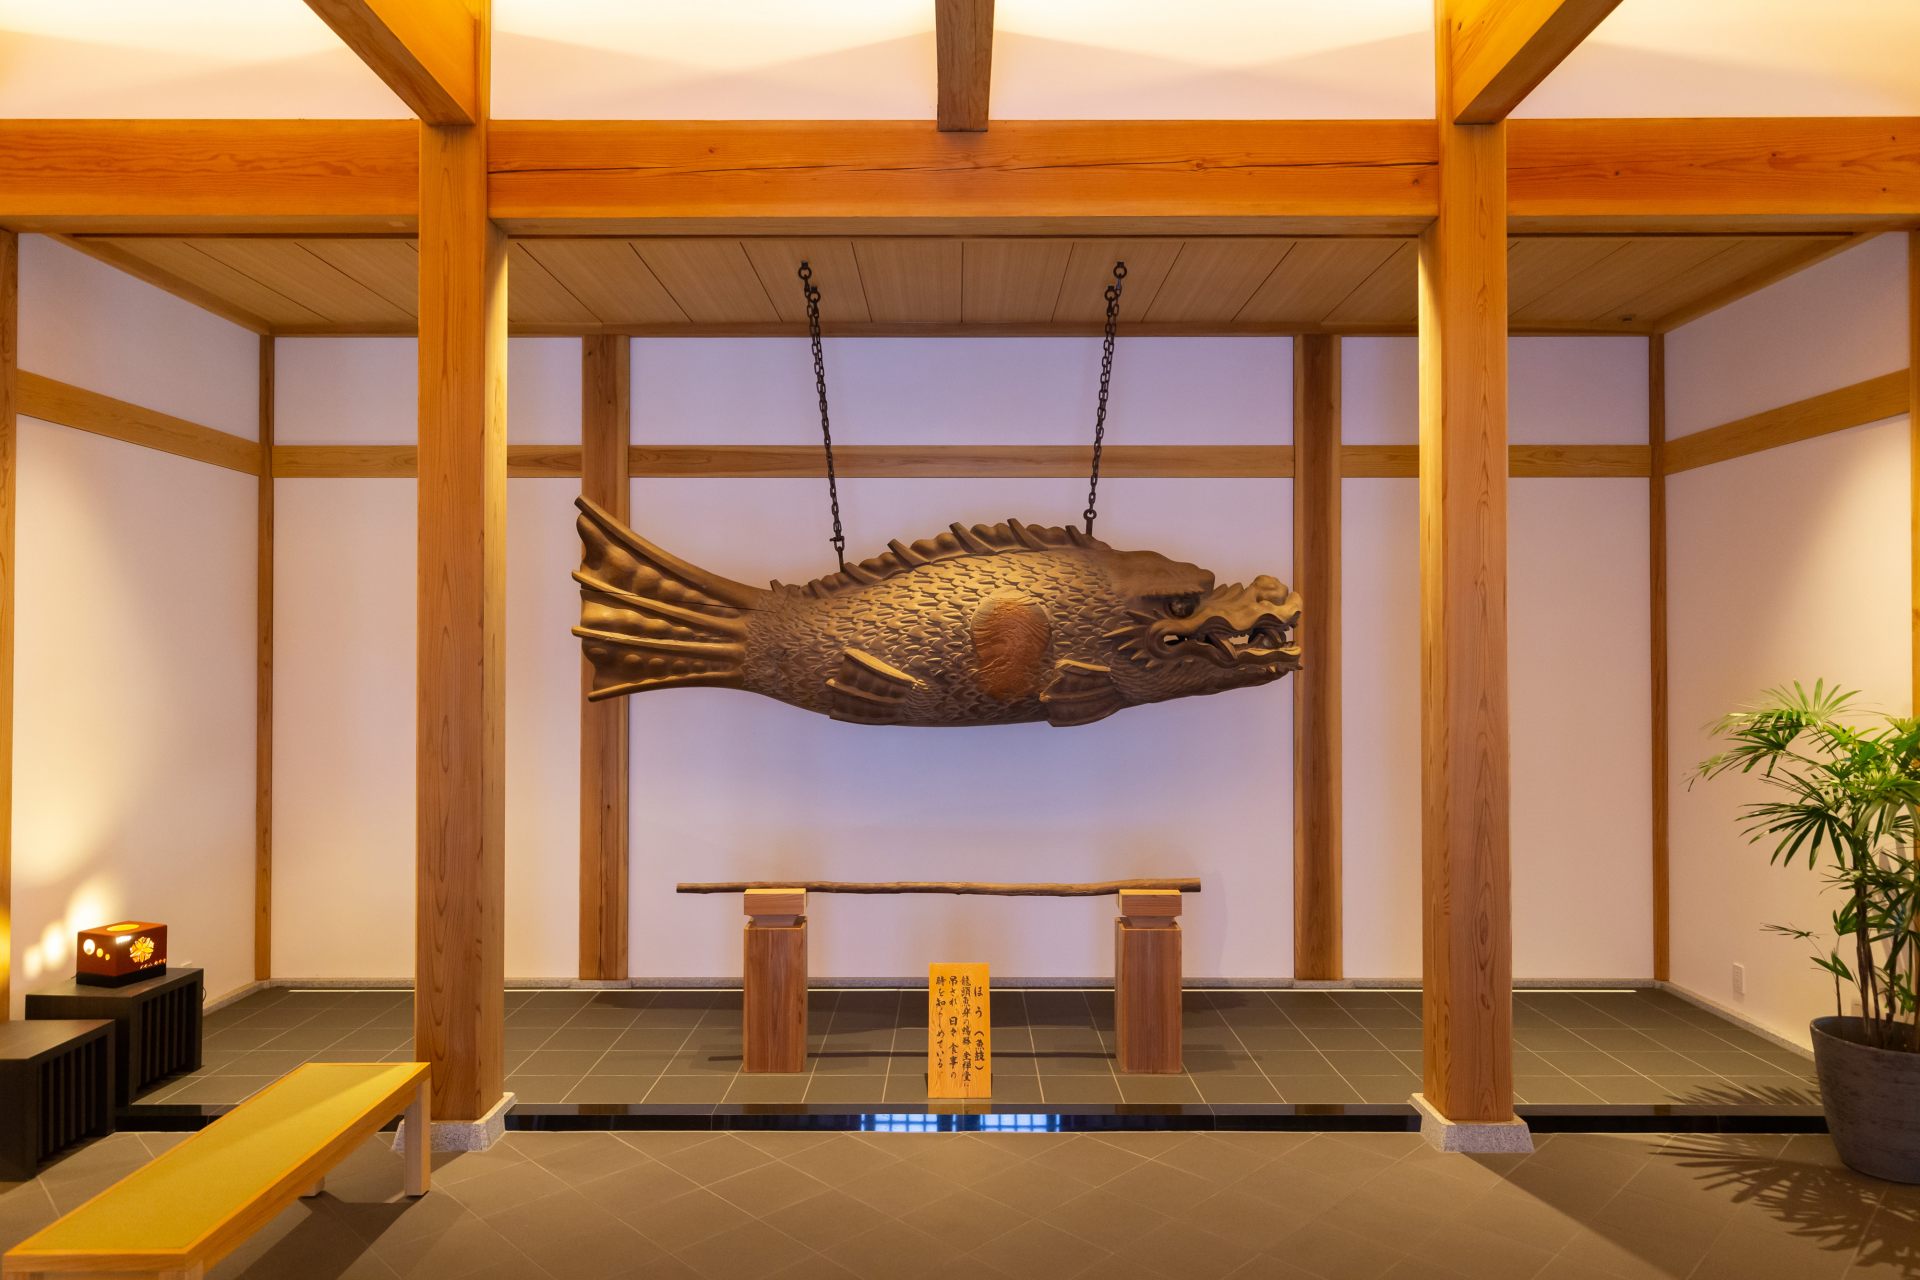 The wooden “Hou” fish carving, displayed at Eiheiji to signal meal times.